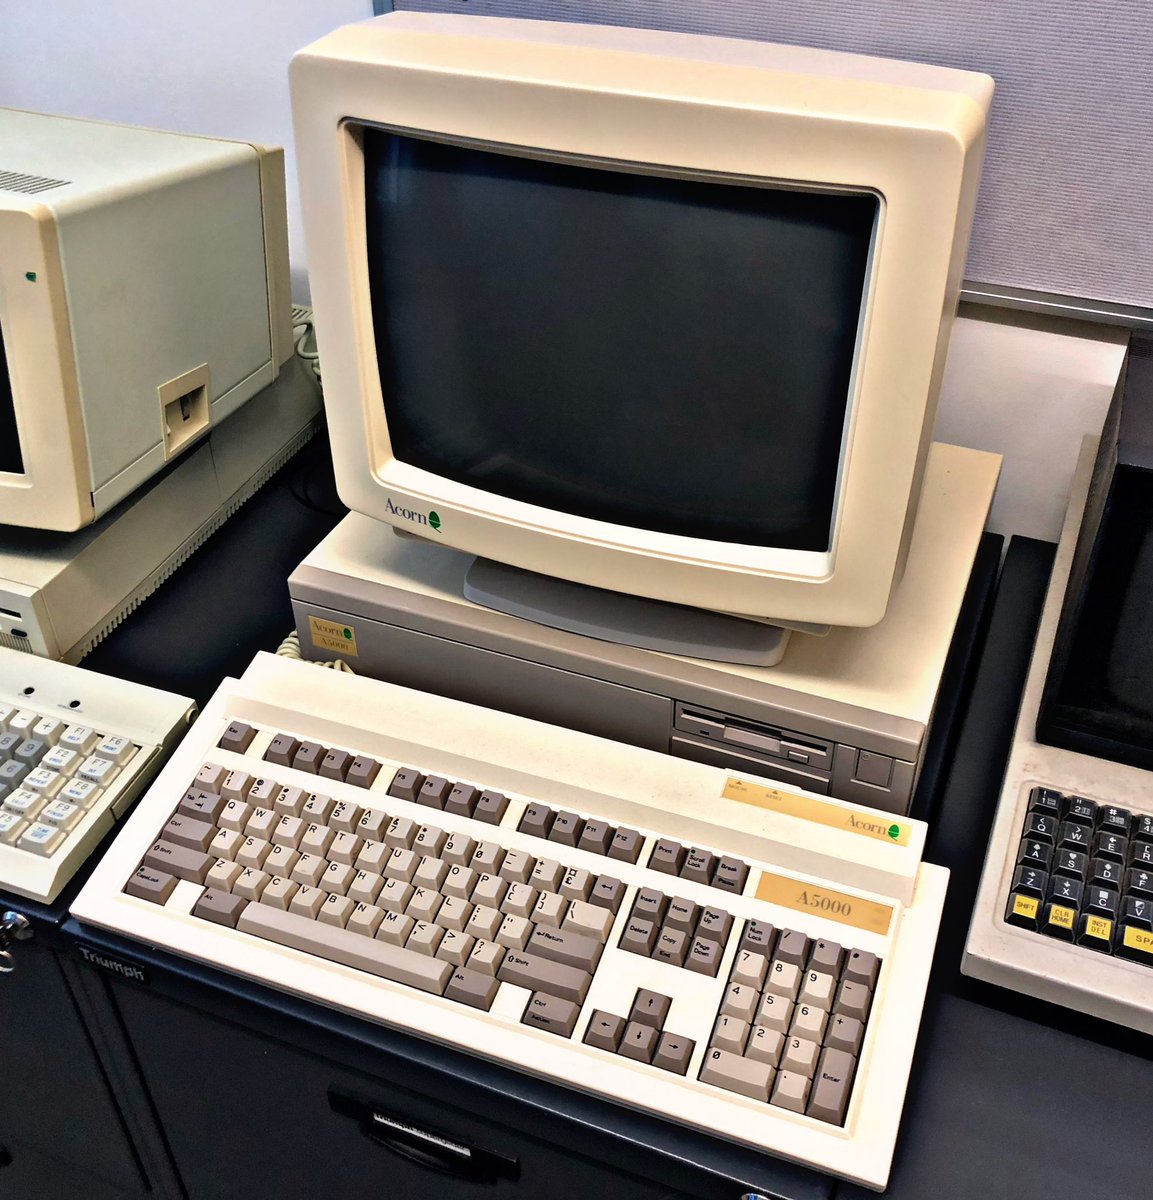 You’ve got an #Acorn #Archimedes #A5000. Do you save it or swap it? If saving, then why? If swapping, then for what? #RetroSaveOrSwap #RetroComputing #ComputerHistory #RetroGaming #VideoGames